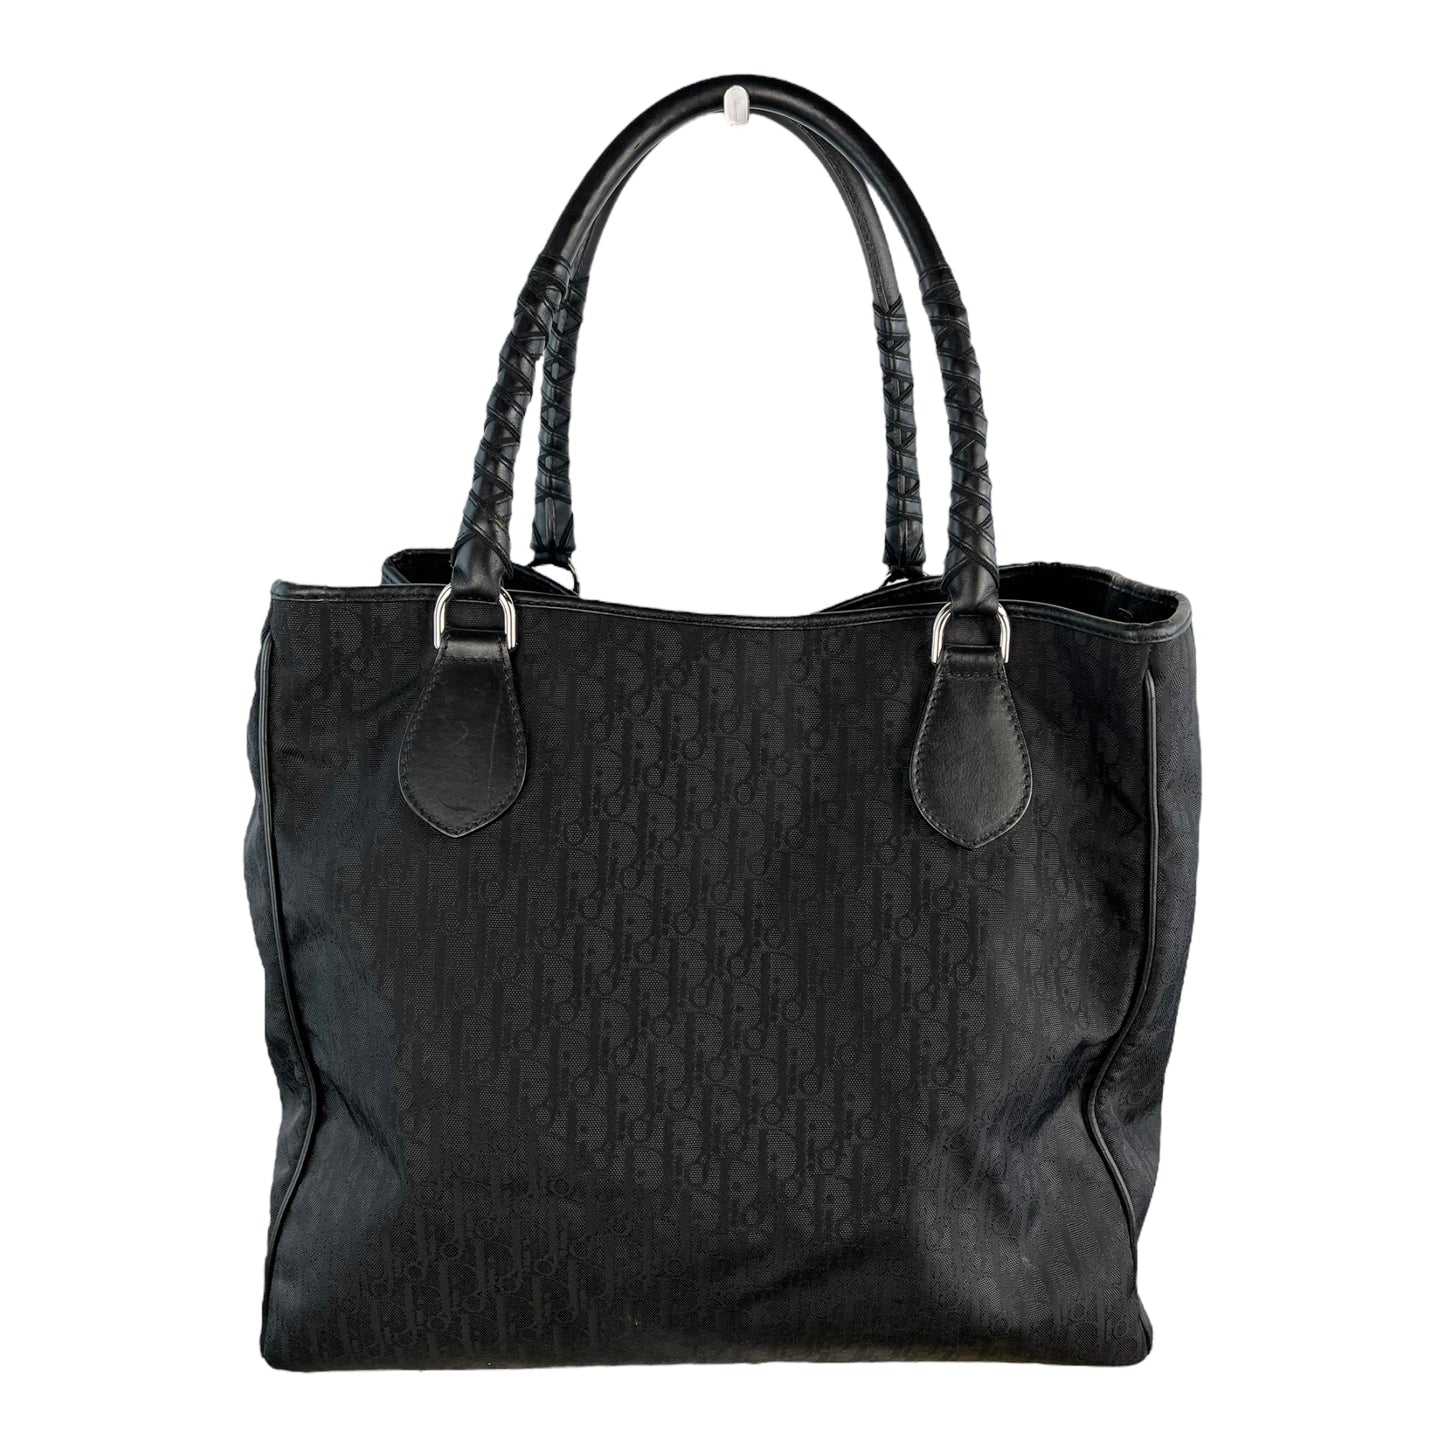 Christian Dior Charming Tote